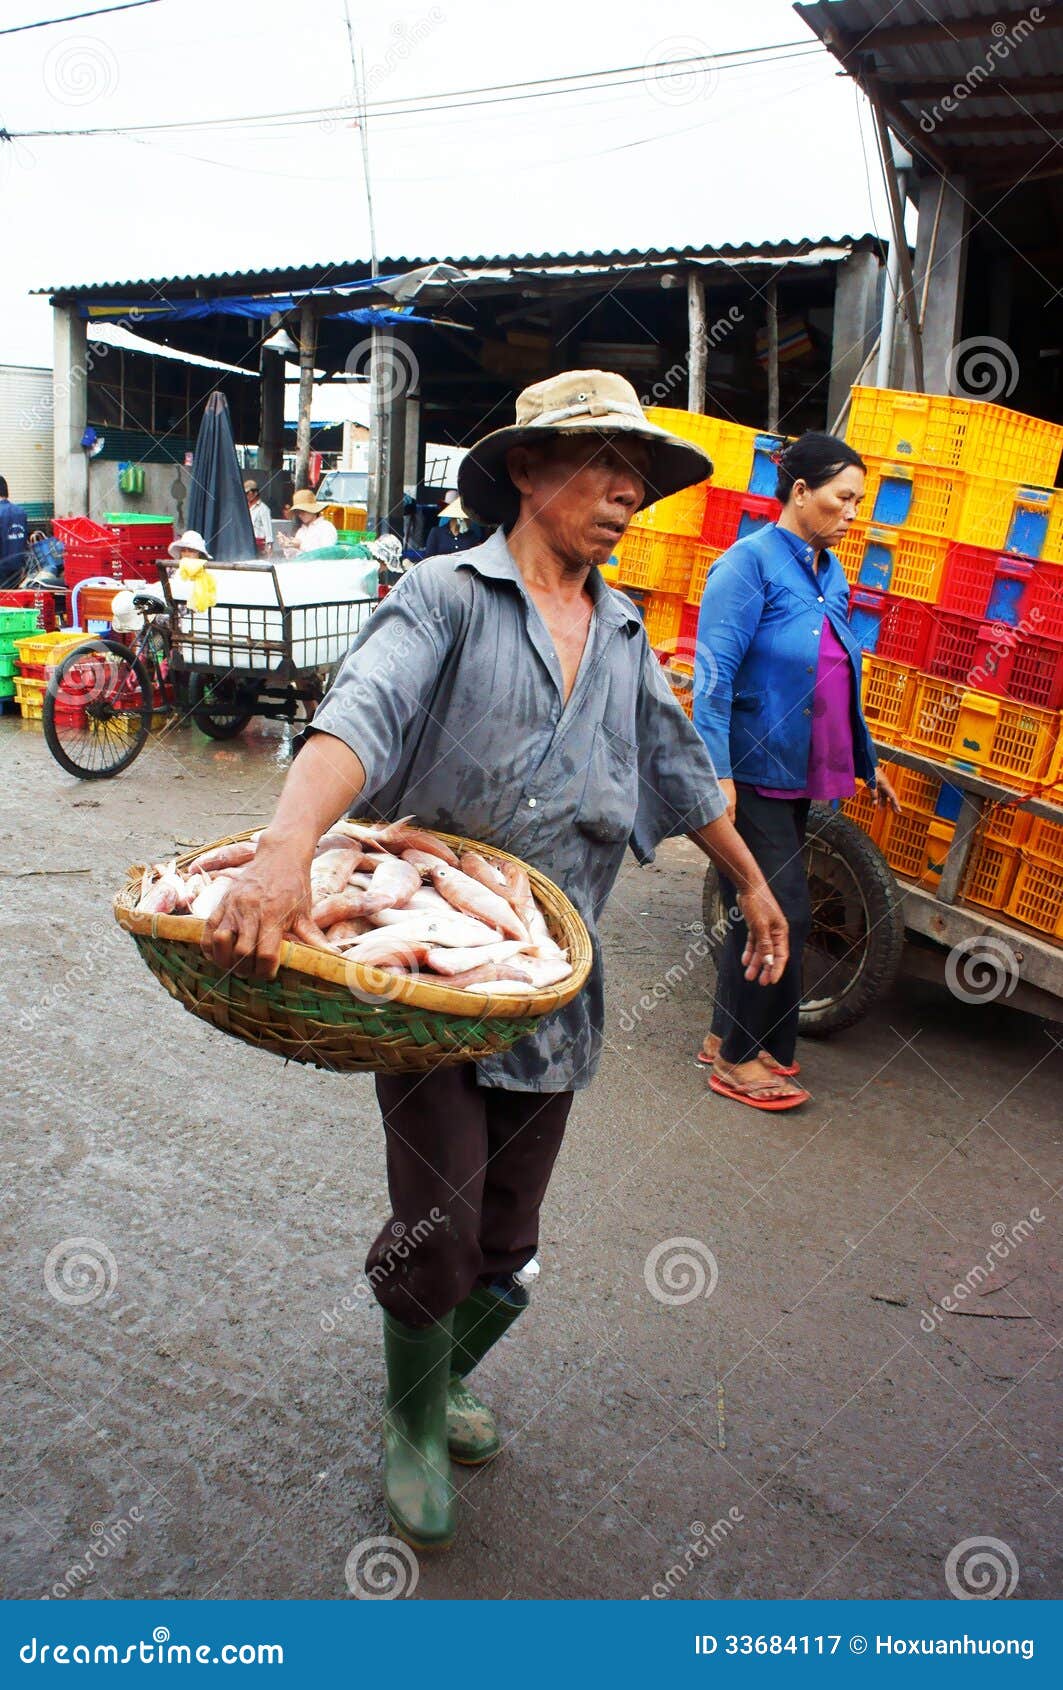 The Man Carry Fish Basket at Fishing Market. LONG Editorial Photography -  Image of convey, market: 33684117